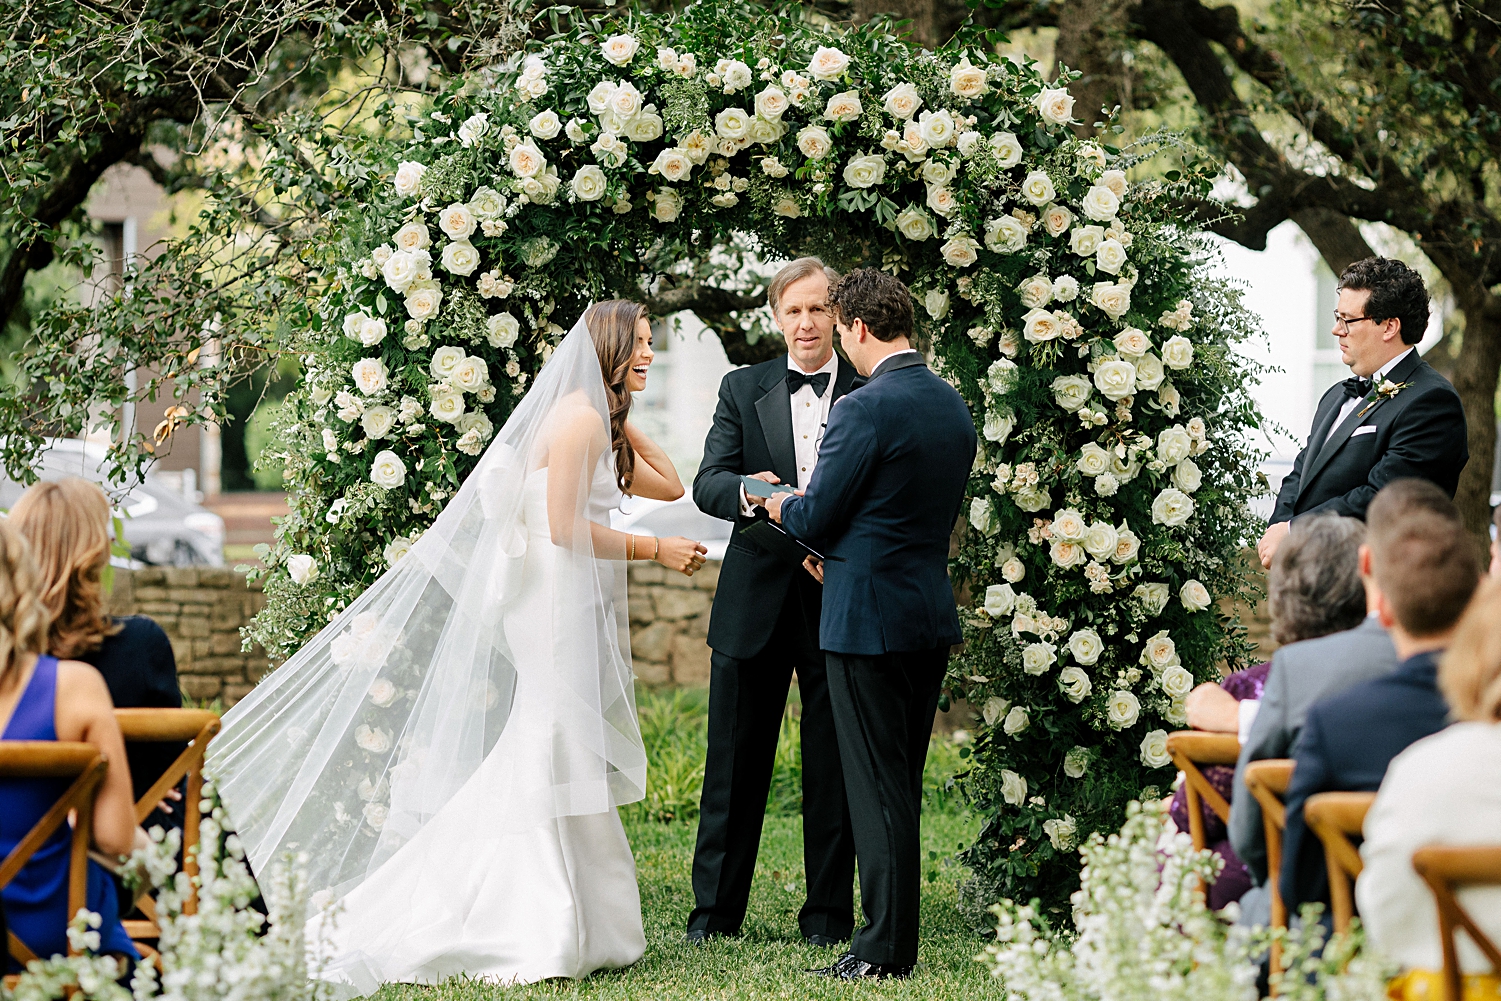 Bride laughing with groom in navy tuxedo at ceremony altar in front of white floral arch